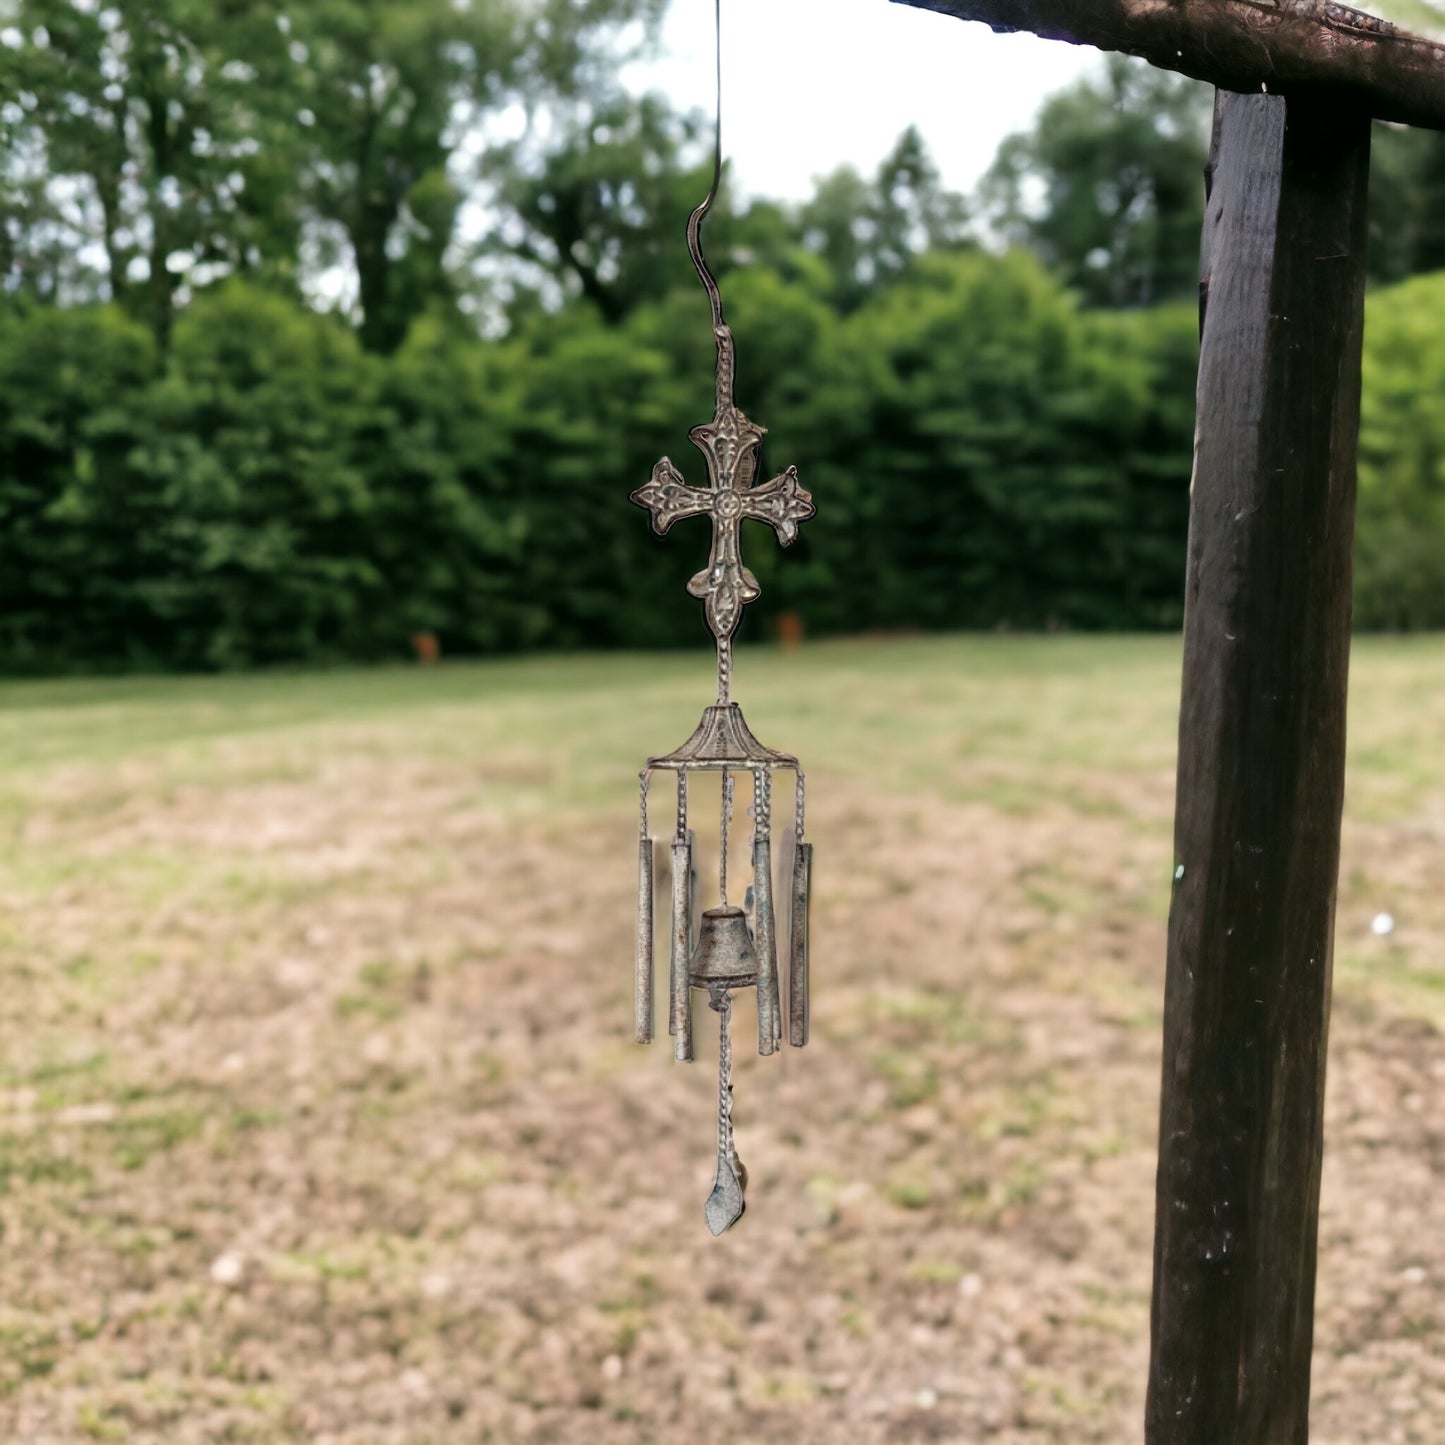 Hanging Rustic Cross Chime Bell - The Renmy Store Homewares & Gifts 